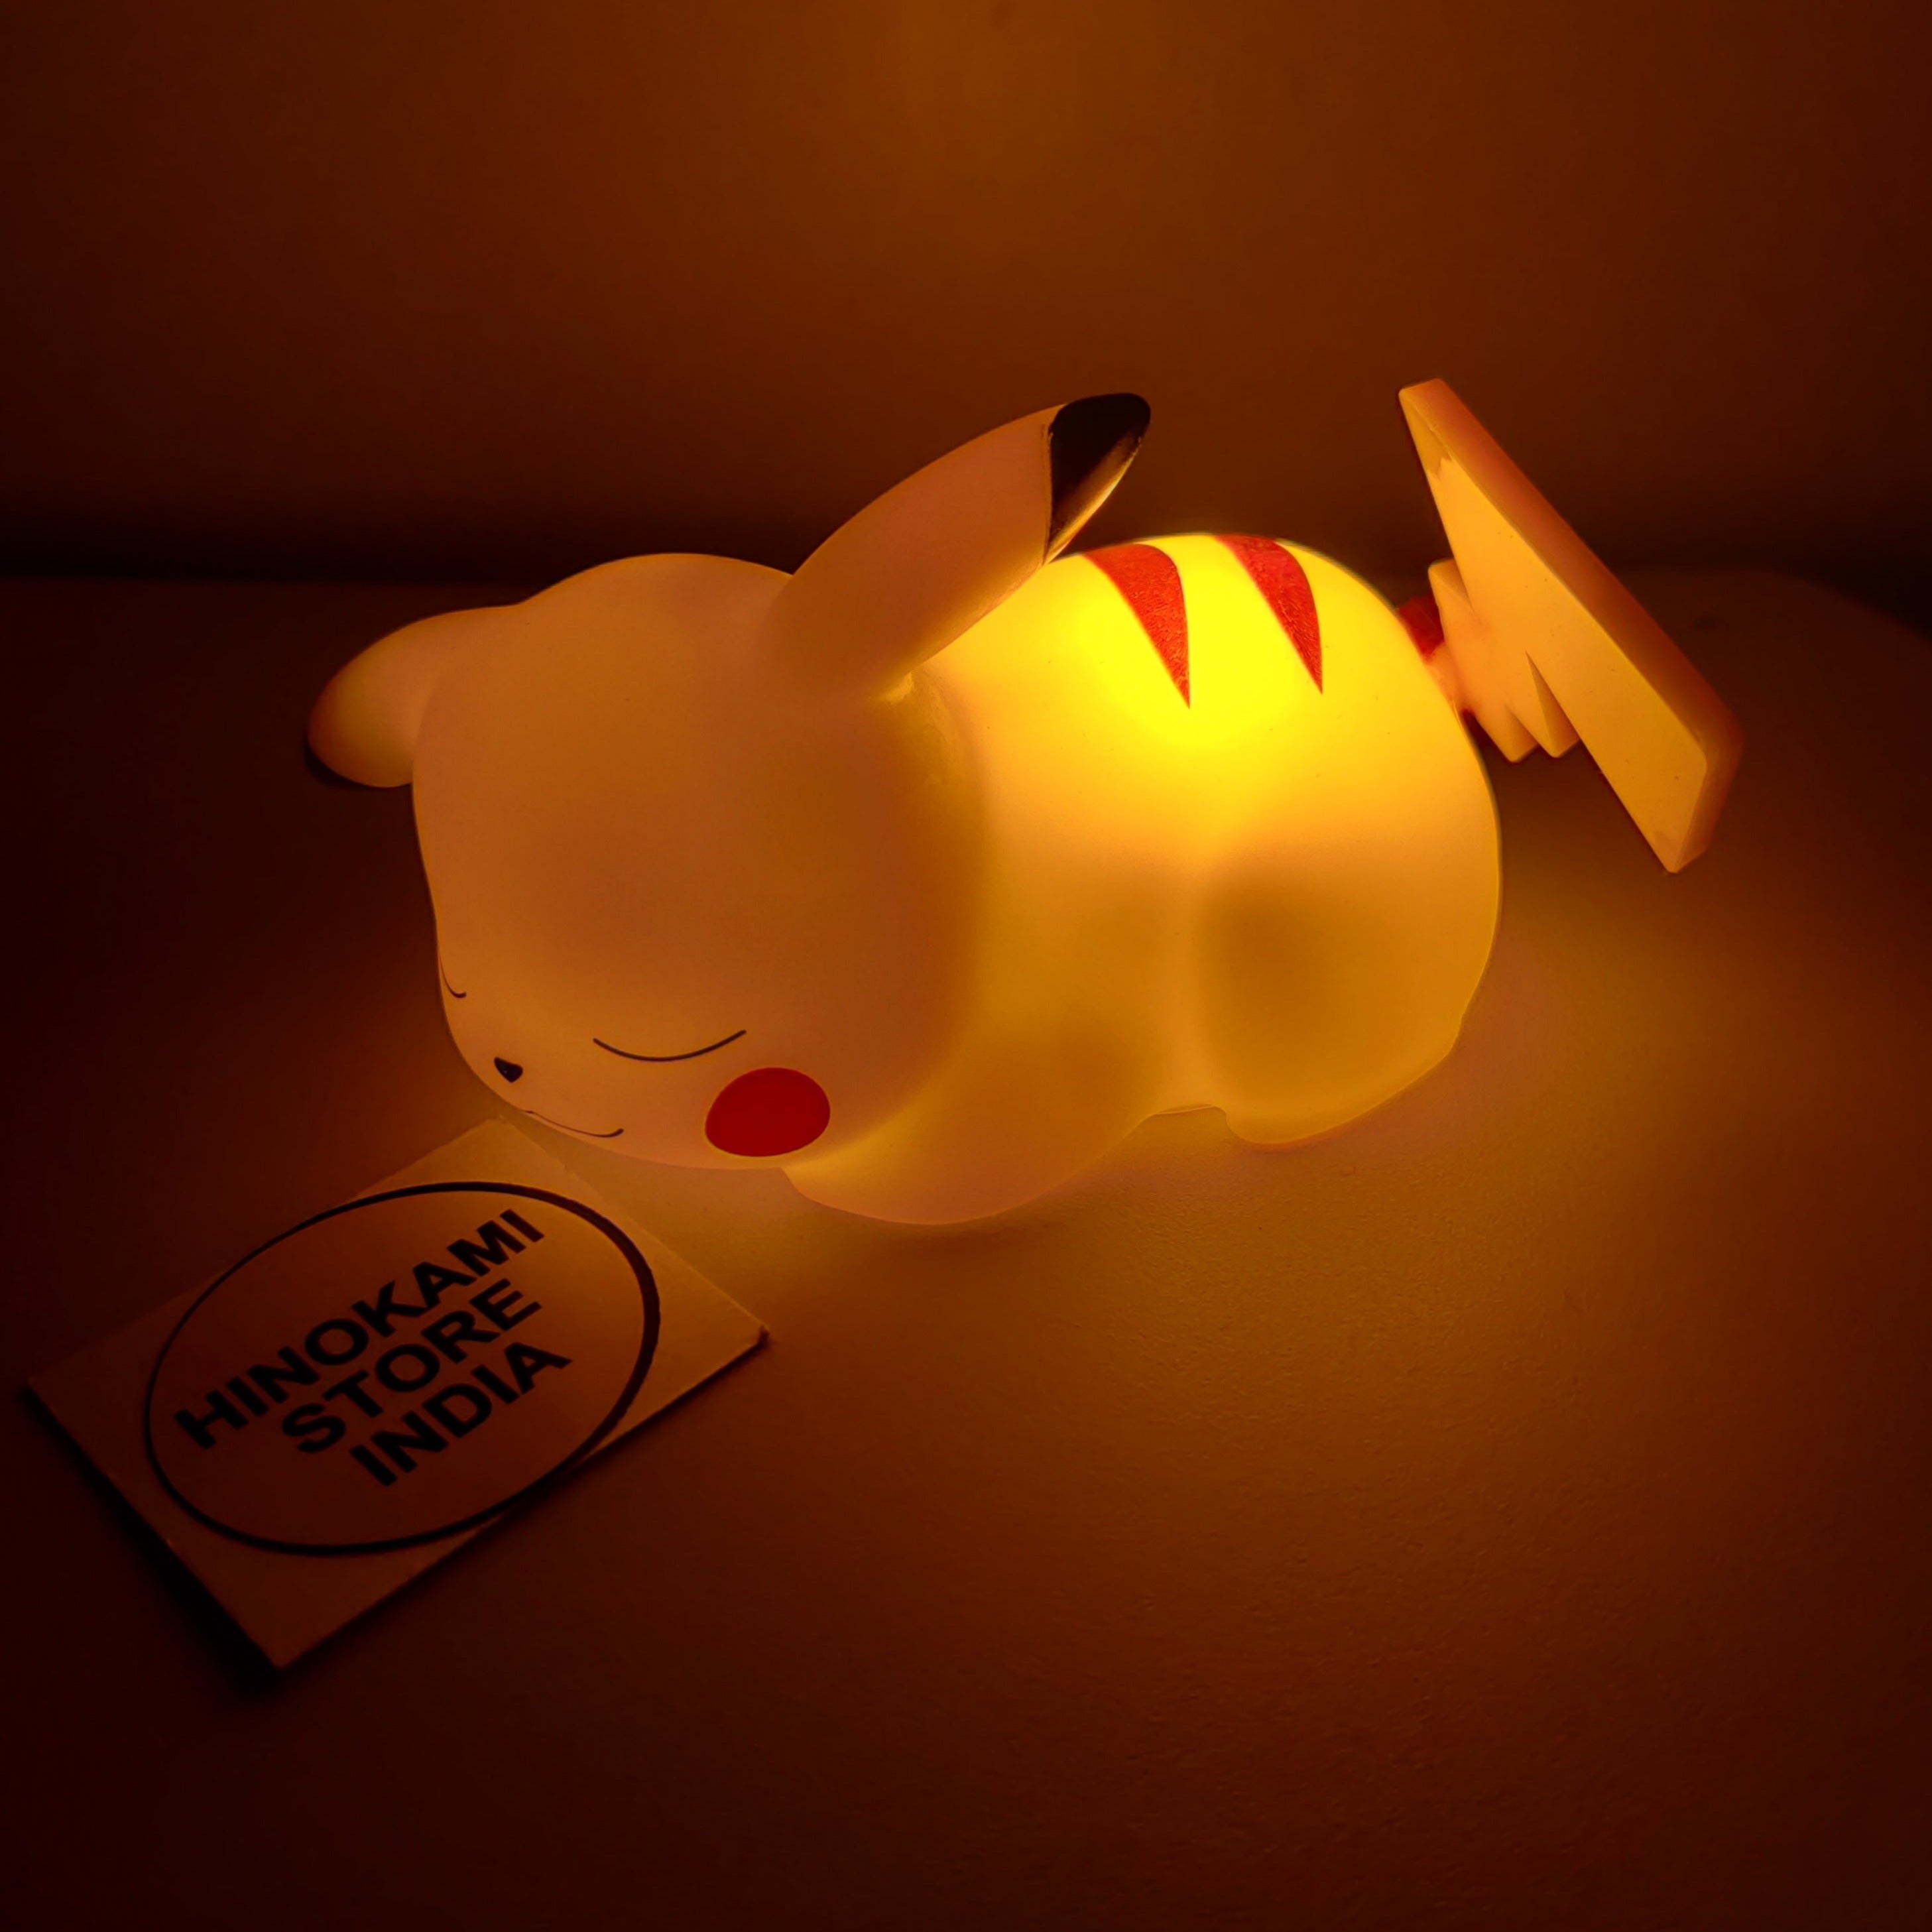 Pikachu lamp - free keychain worth ₹249 with prepaid order of lamp